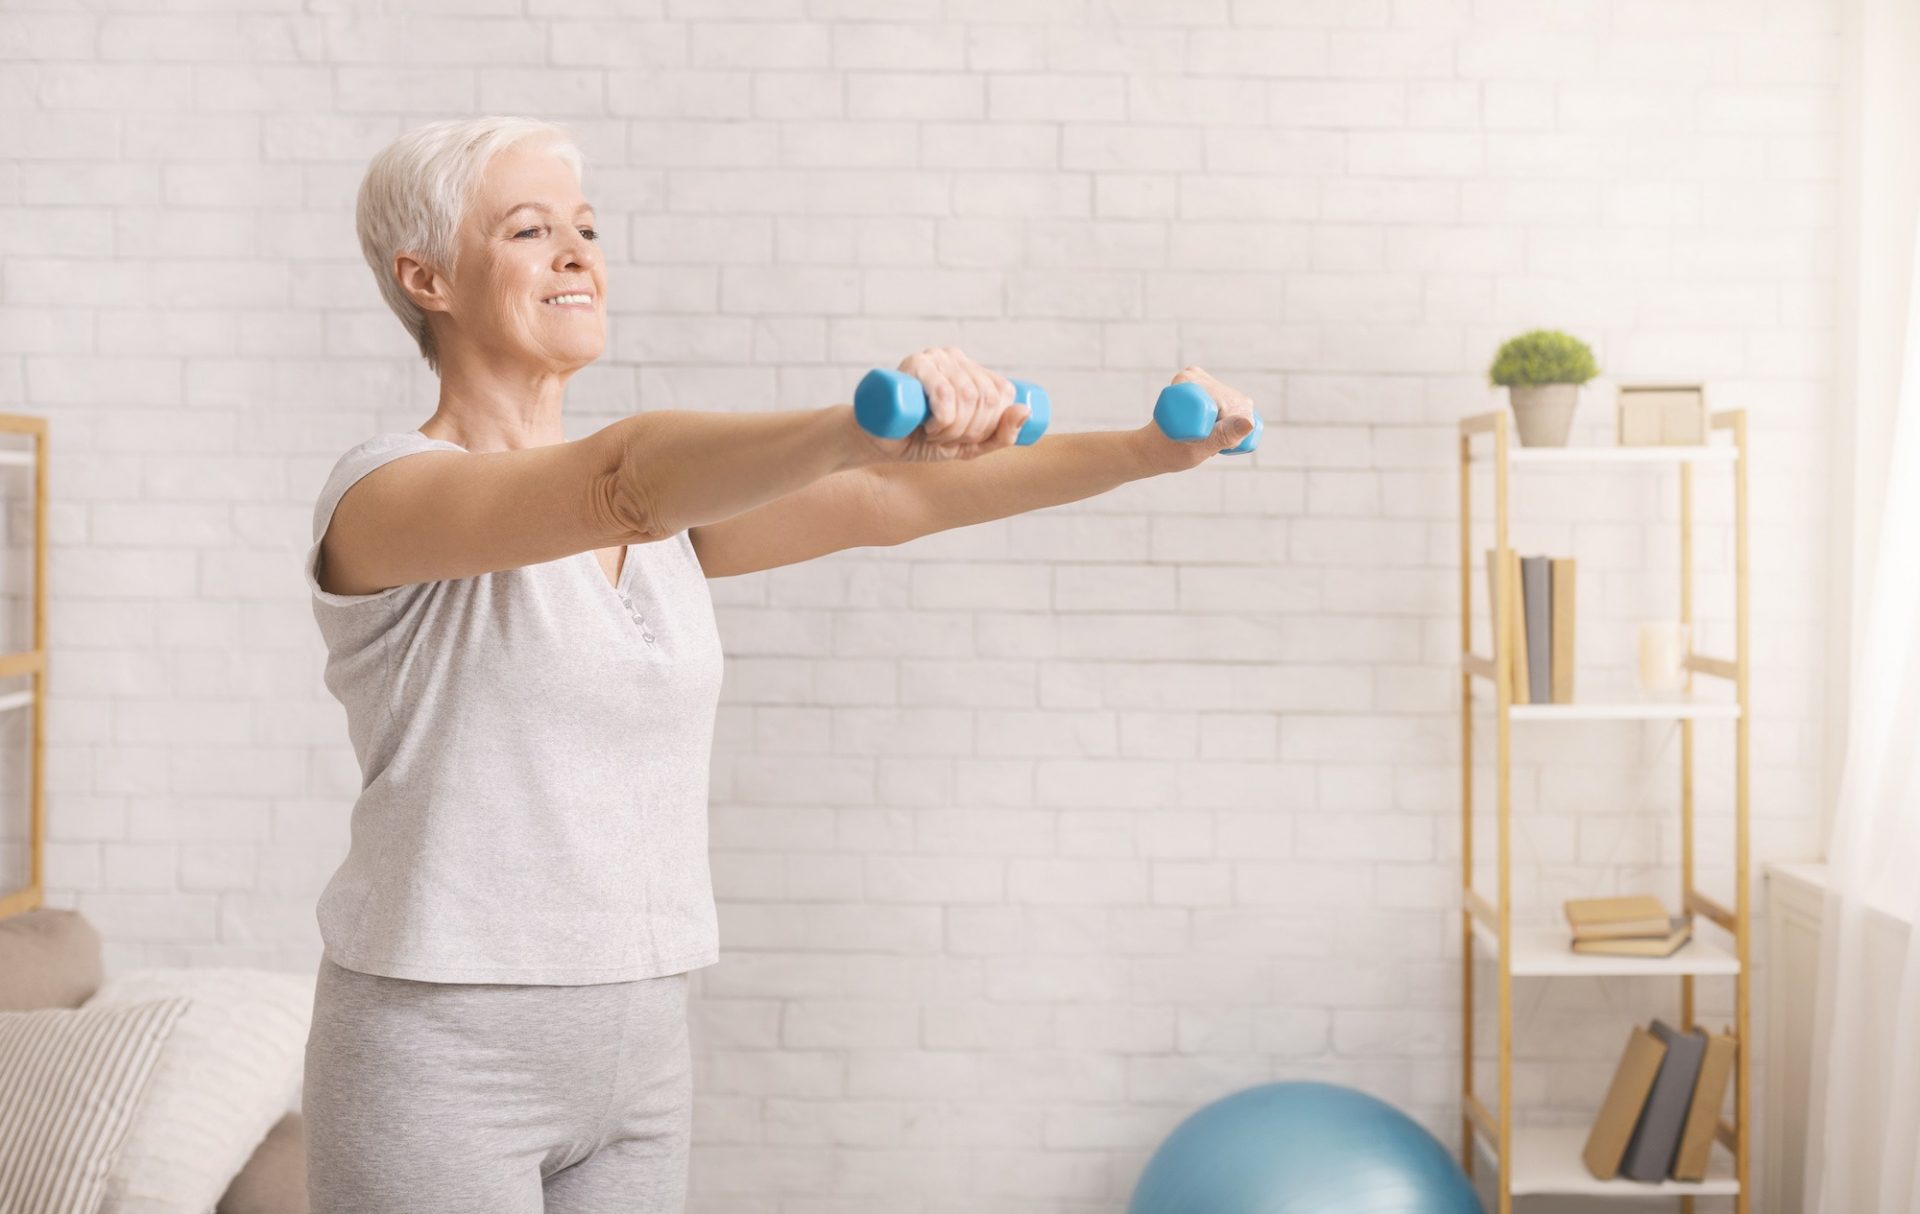 Low Cost Home Exercise Equipment For Baby Boomers